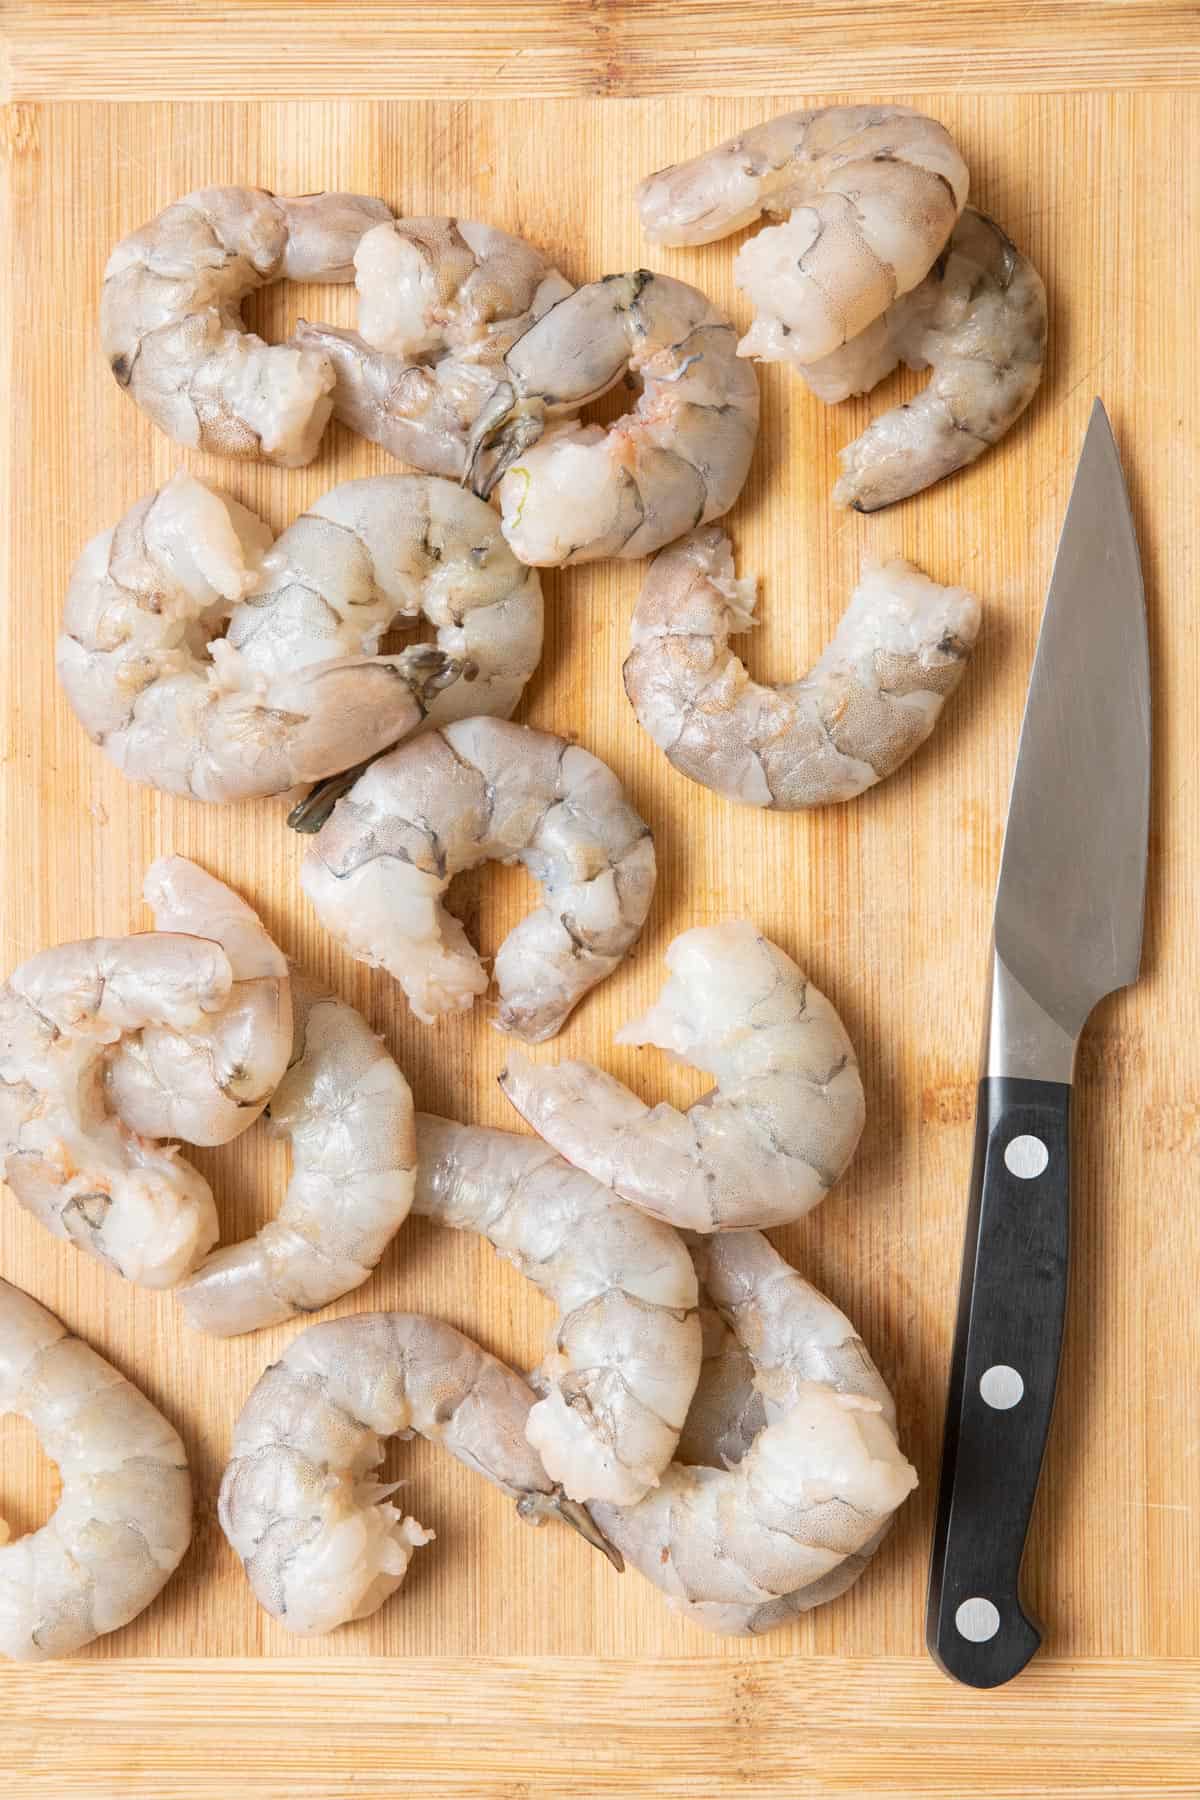 Peeled and deveined shrimp on a cutting board with a pairing knife.